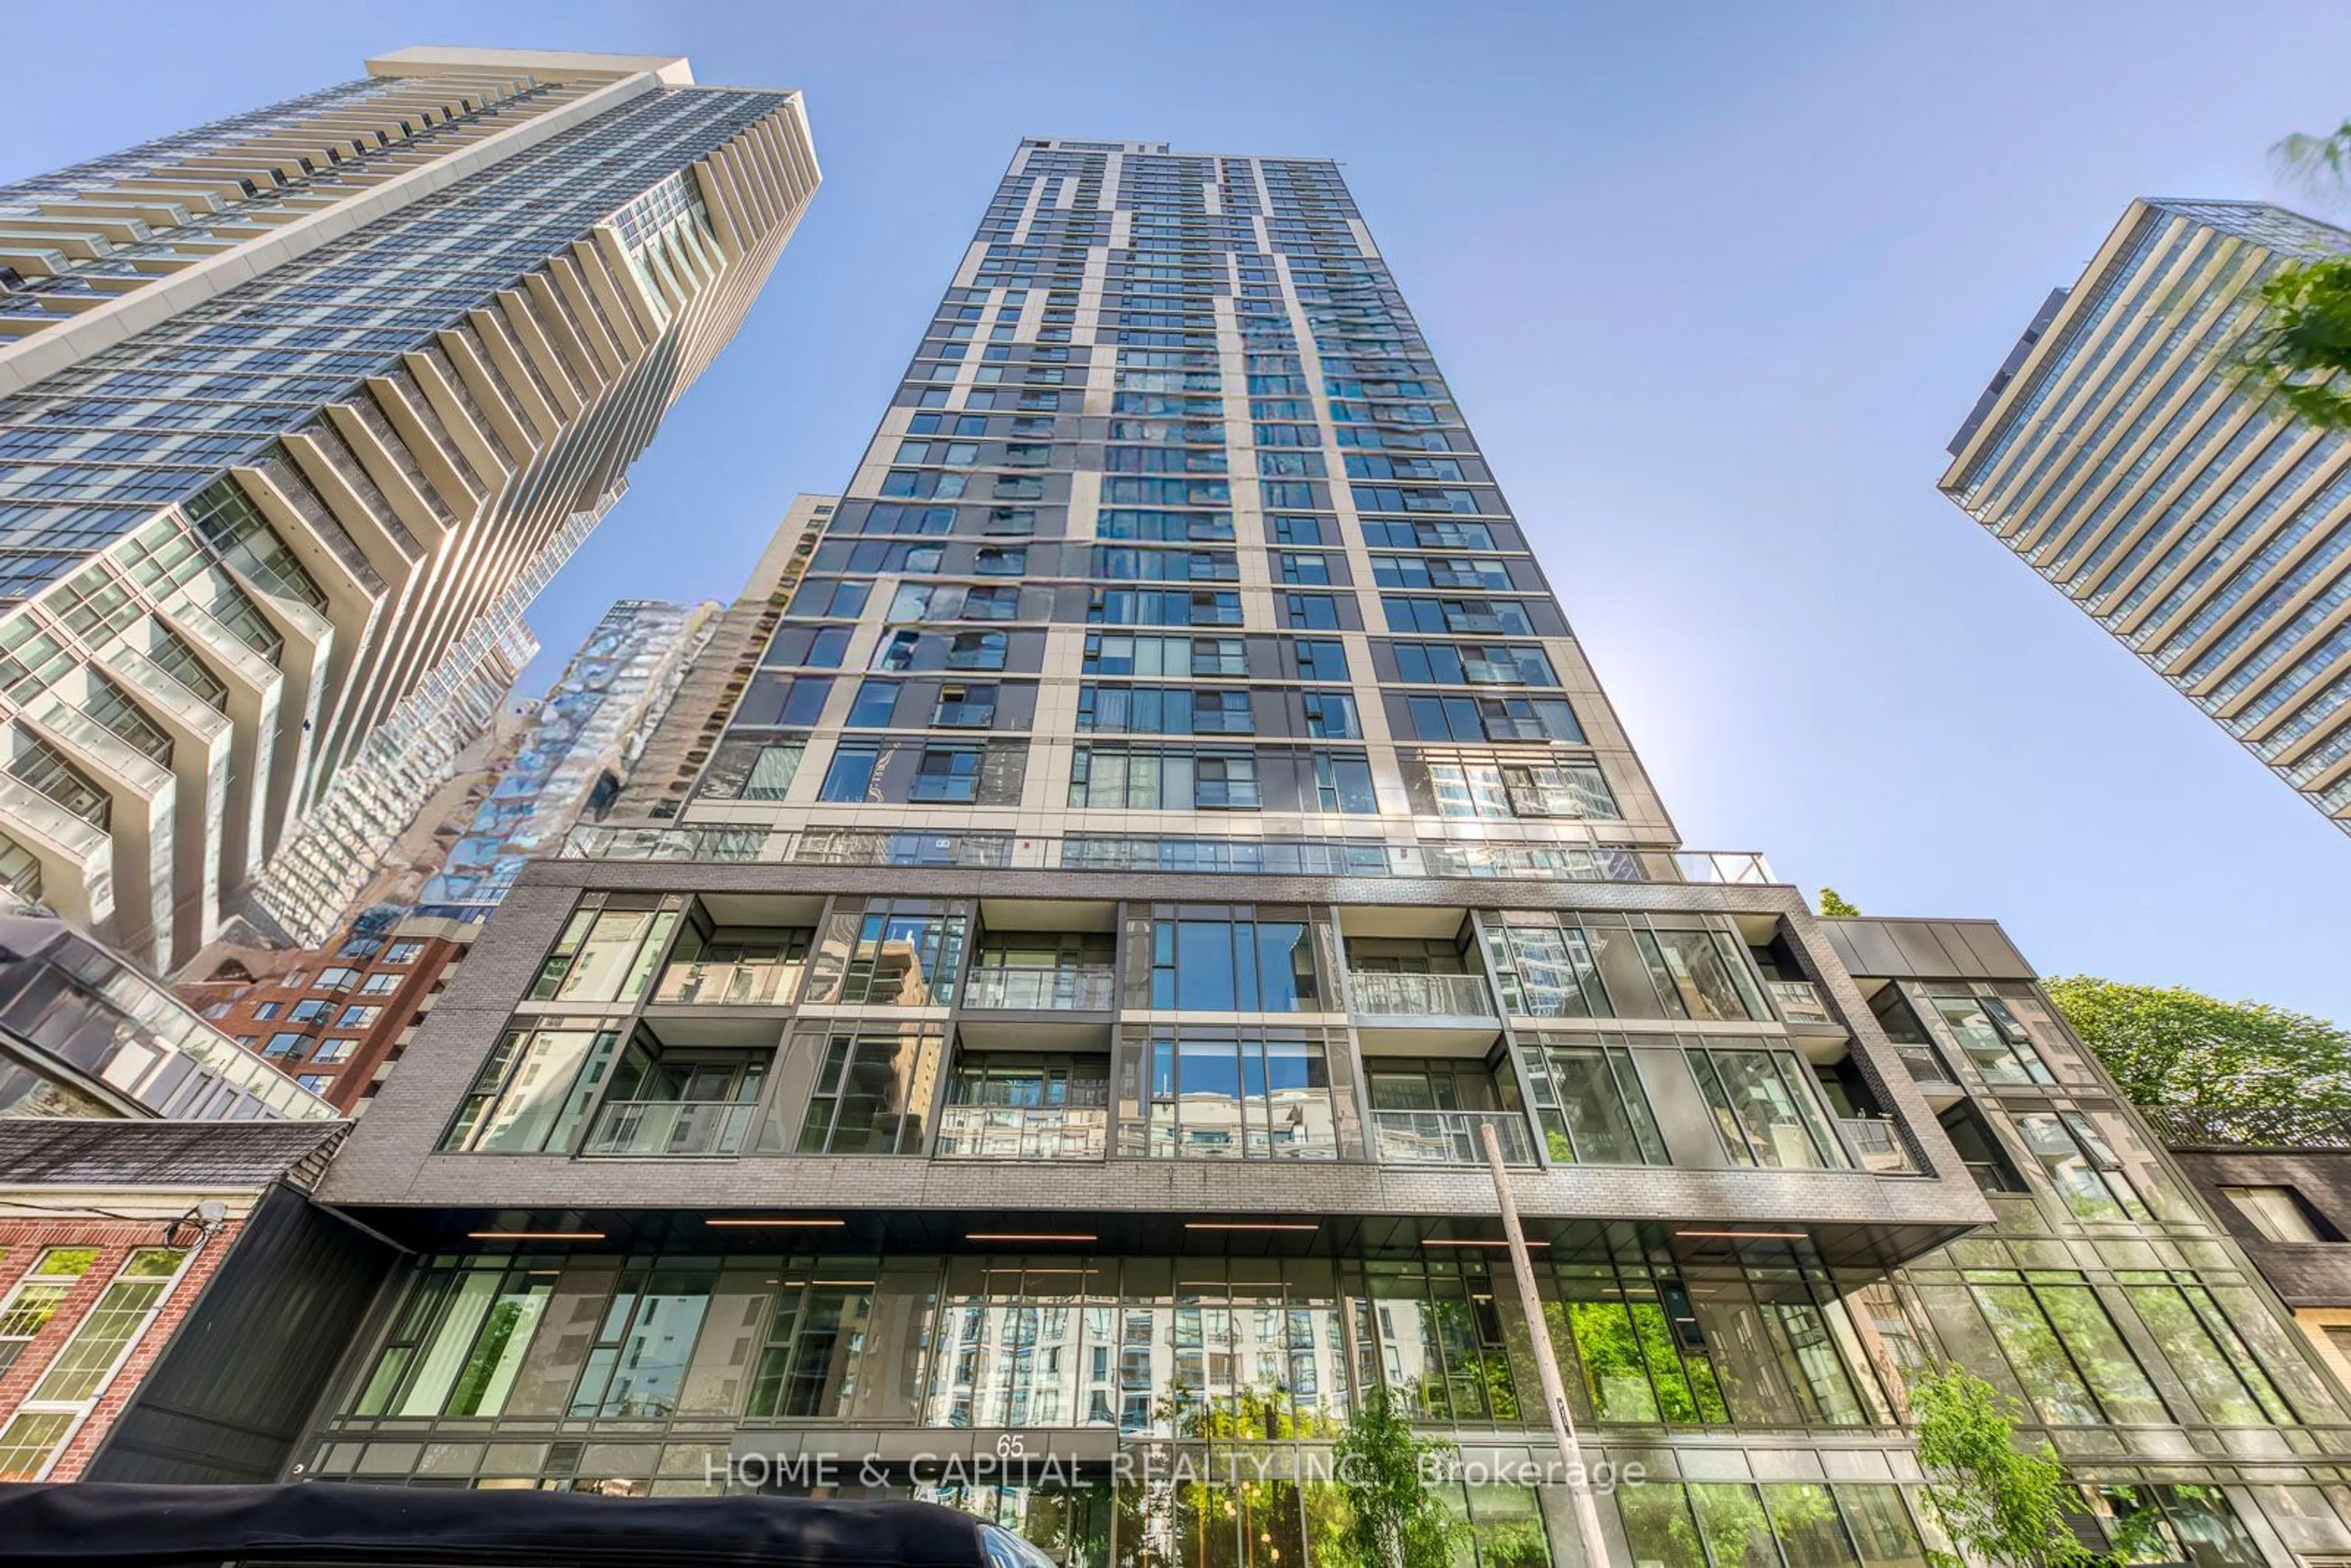 A pic from exterior of the house or condo for 65 Mutual St #2401, Toronto Ontario M5B 2A9